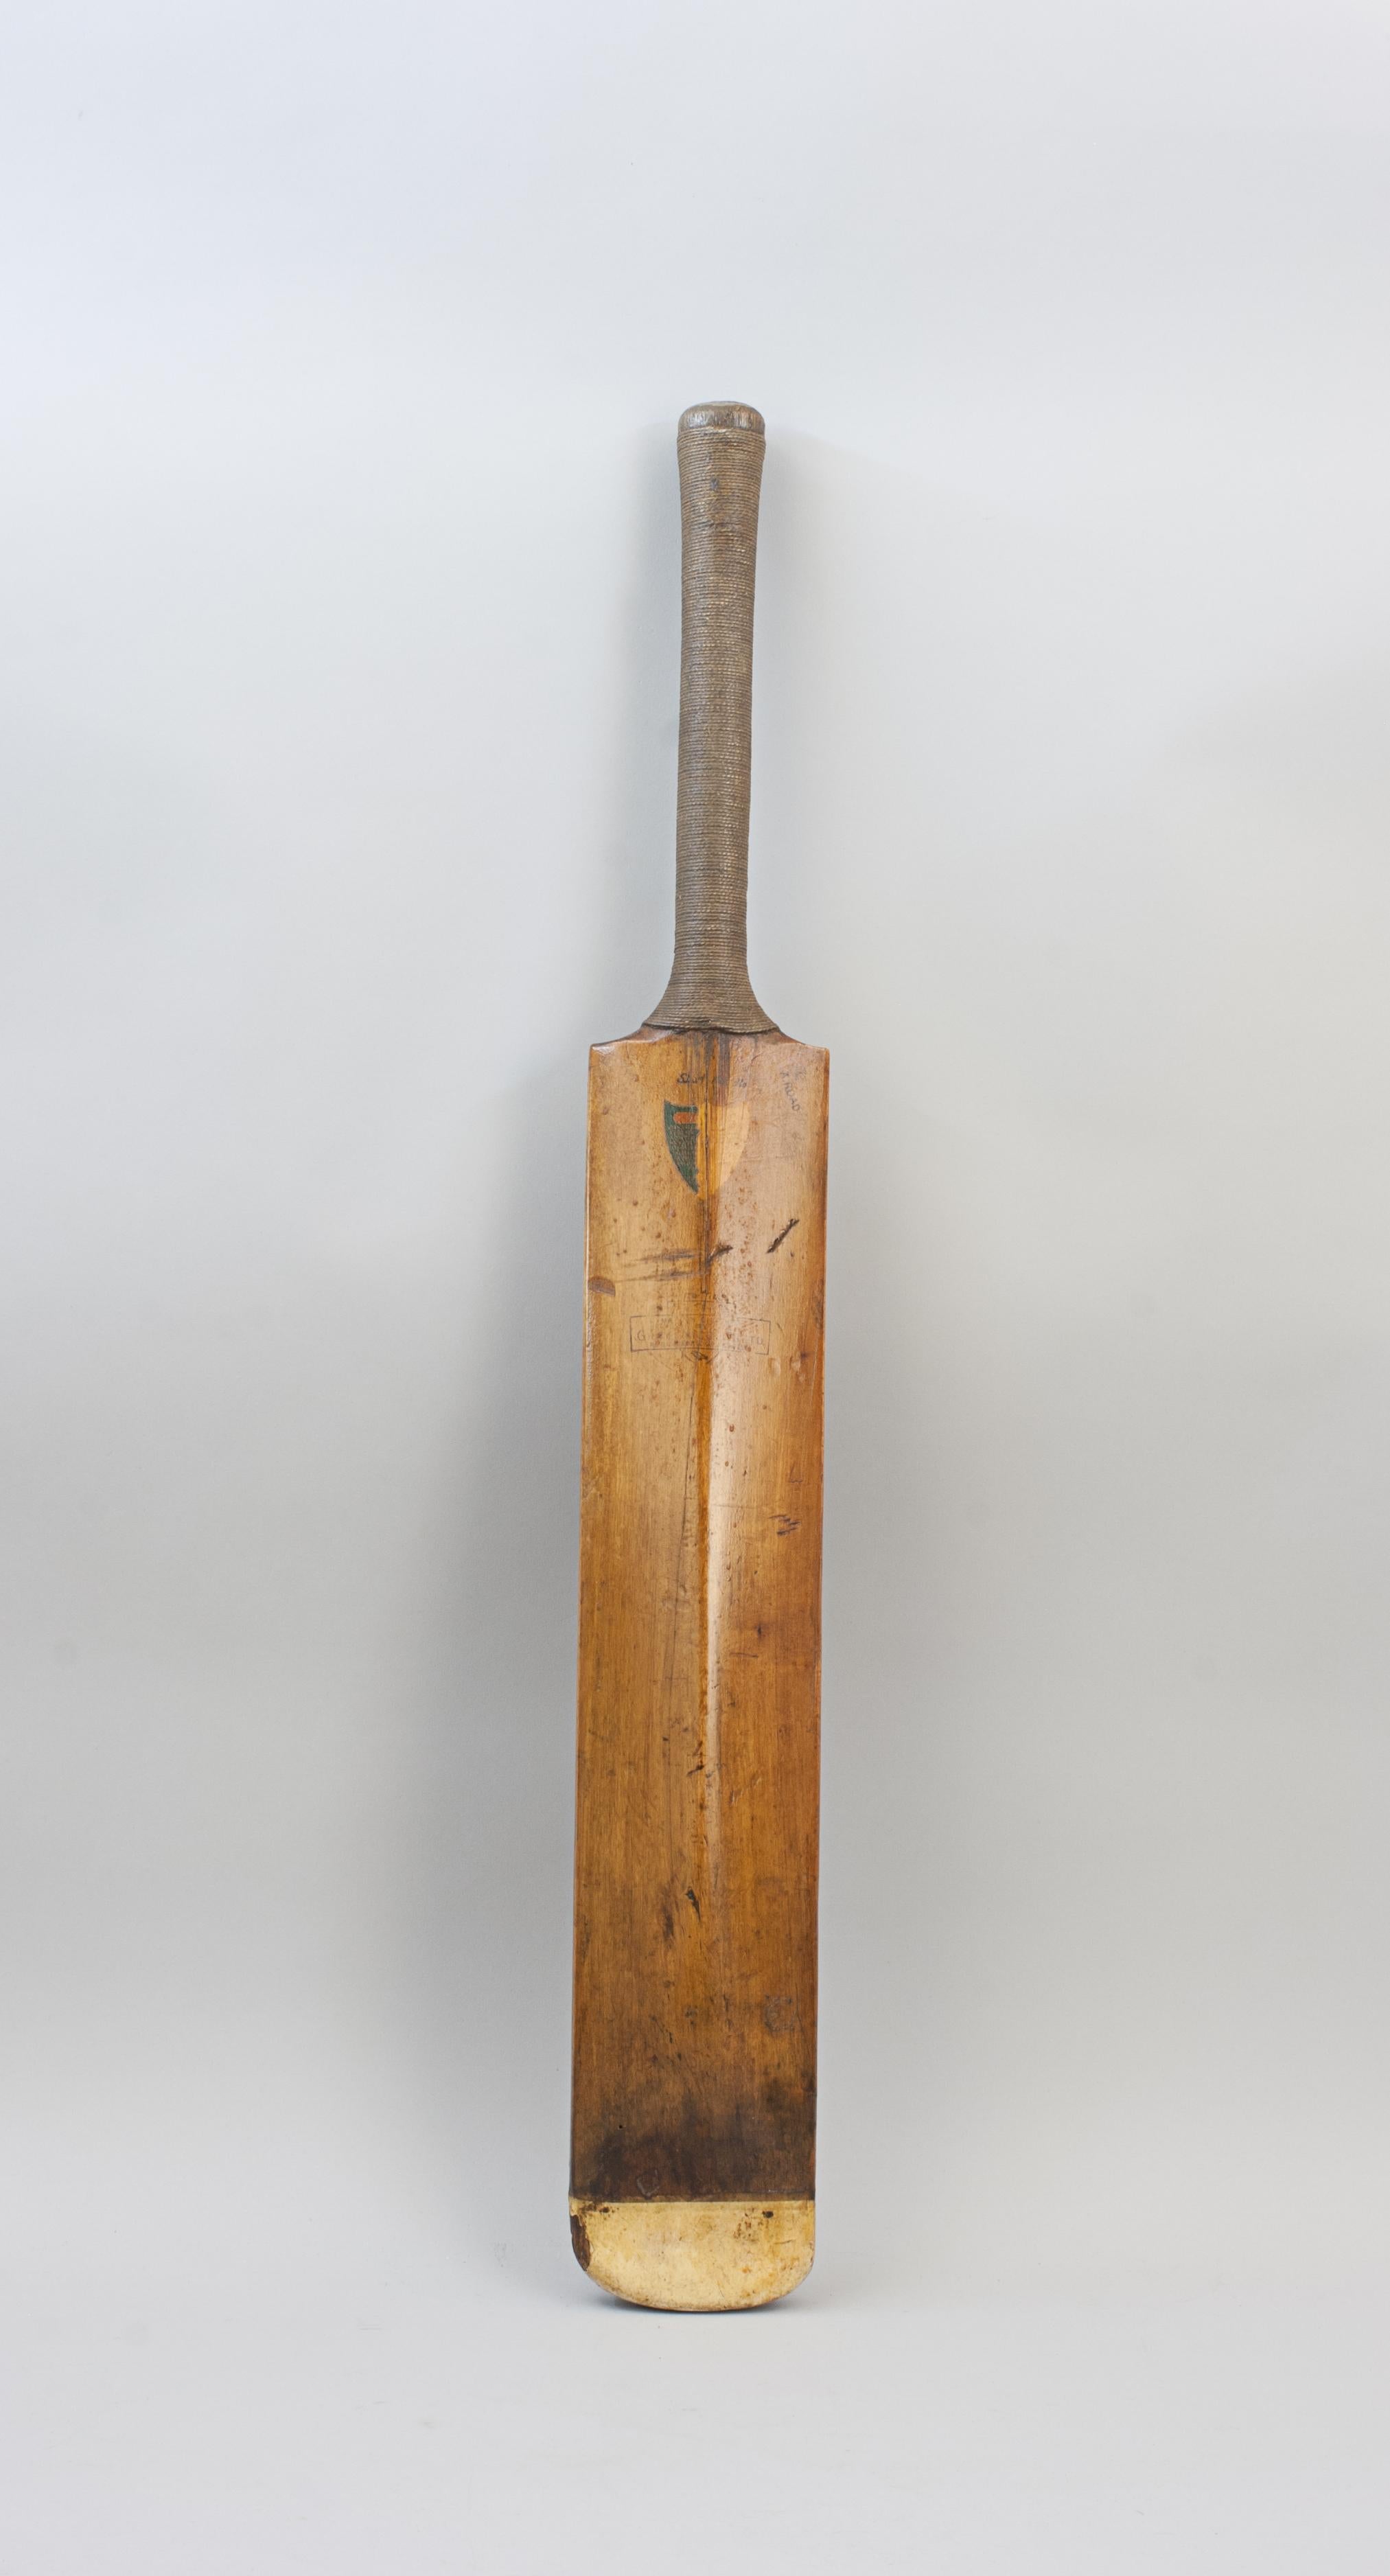 Vintage Nicolls Cricket Bat.
A good Nicolls willow cricket bat 'White Toe'. The writing on the front of the blade 'NICOLLS, White Toe, Toughened And Damp Proof, Patent No. ??????, Melbourne International Exhibition stamp, Specially Selected Blade,